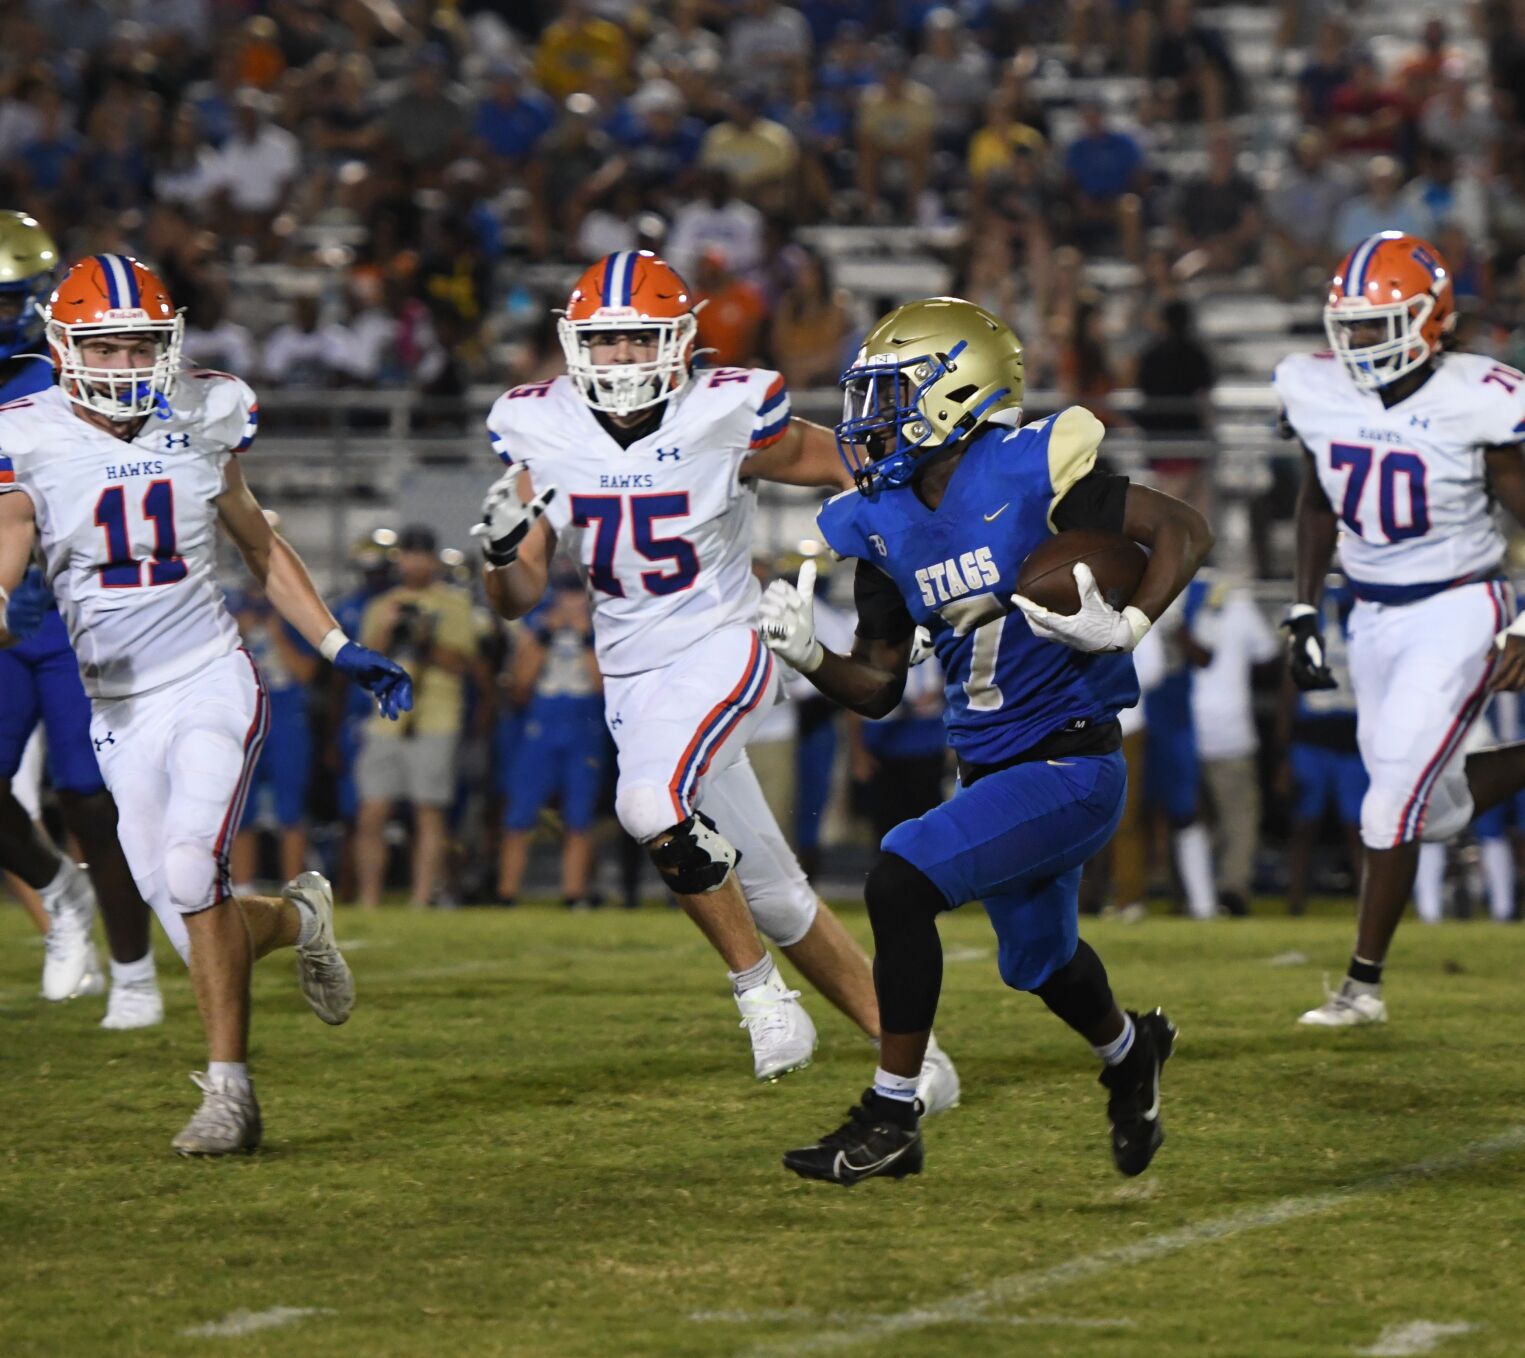 Stags host West Ashley in hall of fame game Sept. 8